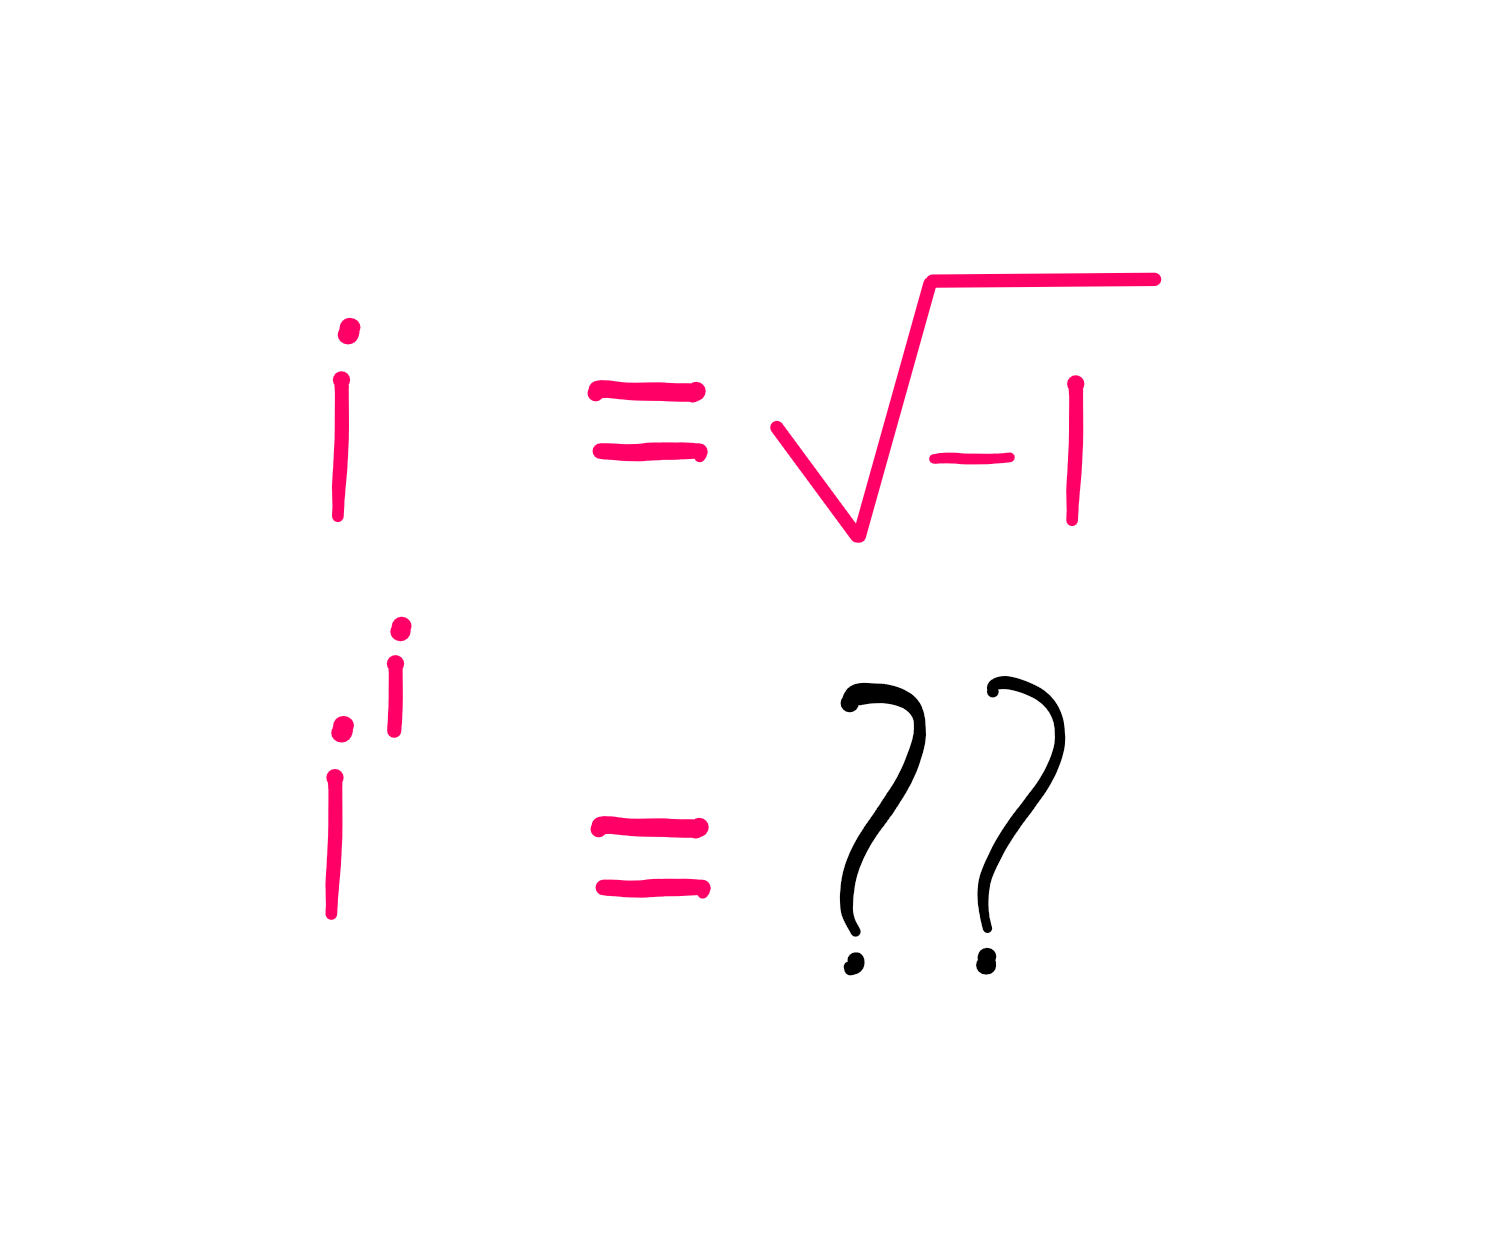 How To Really Solve i^i? - An image with the following expressions: i = √(-1); i^i = ??